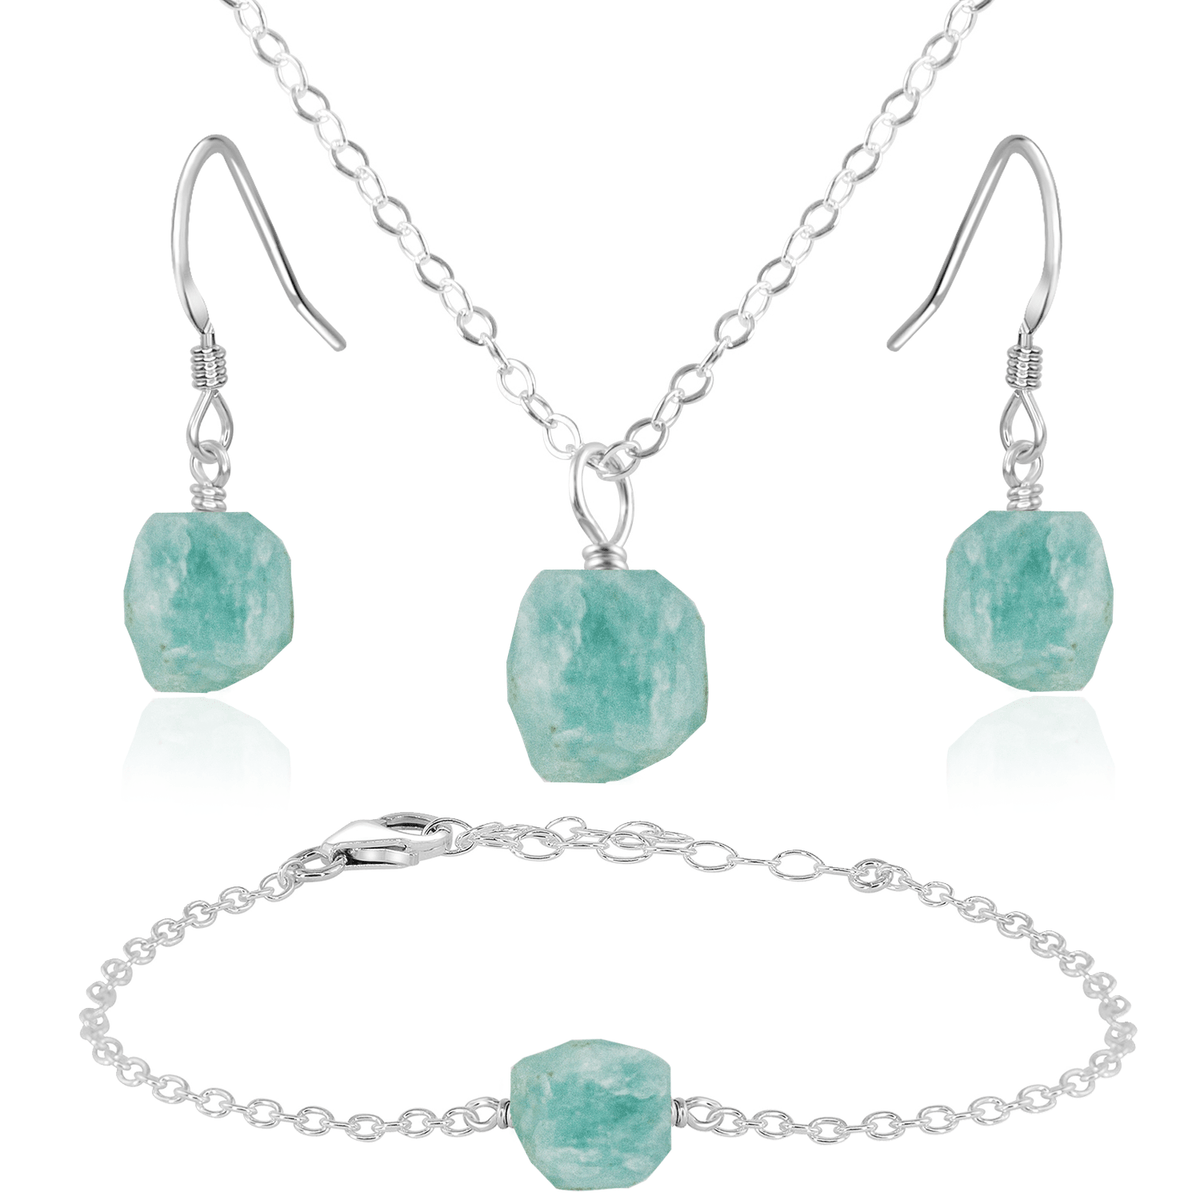 Raw Amazonite Crystal Necklace, Earrings and Bracelet Set - Raw Amazonite Crystal Necklace, Earrings and Bracelet Set - Sterling Silver / Cable / Necklace & Earrings & Bracelet - Luna Tide Handmade Crystal Jewellery